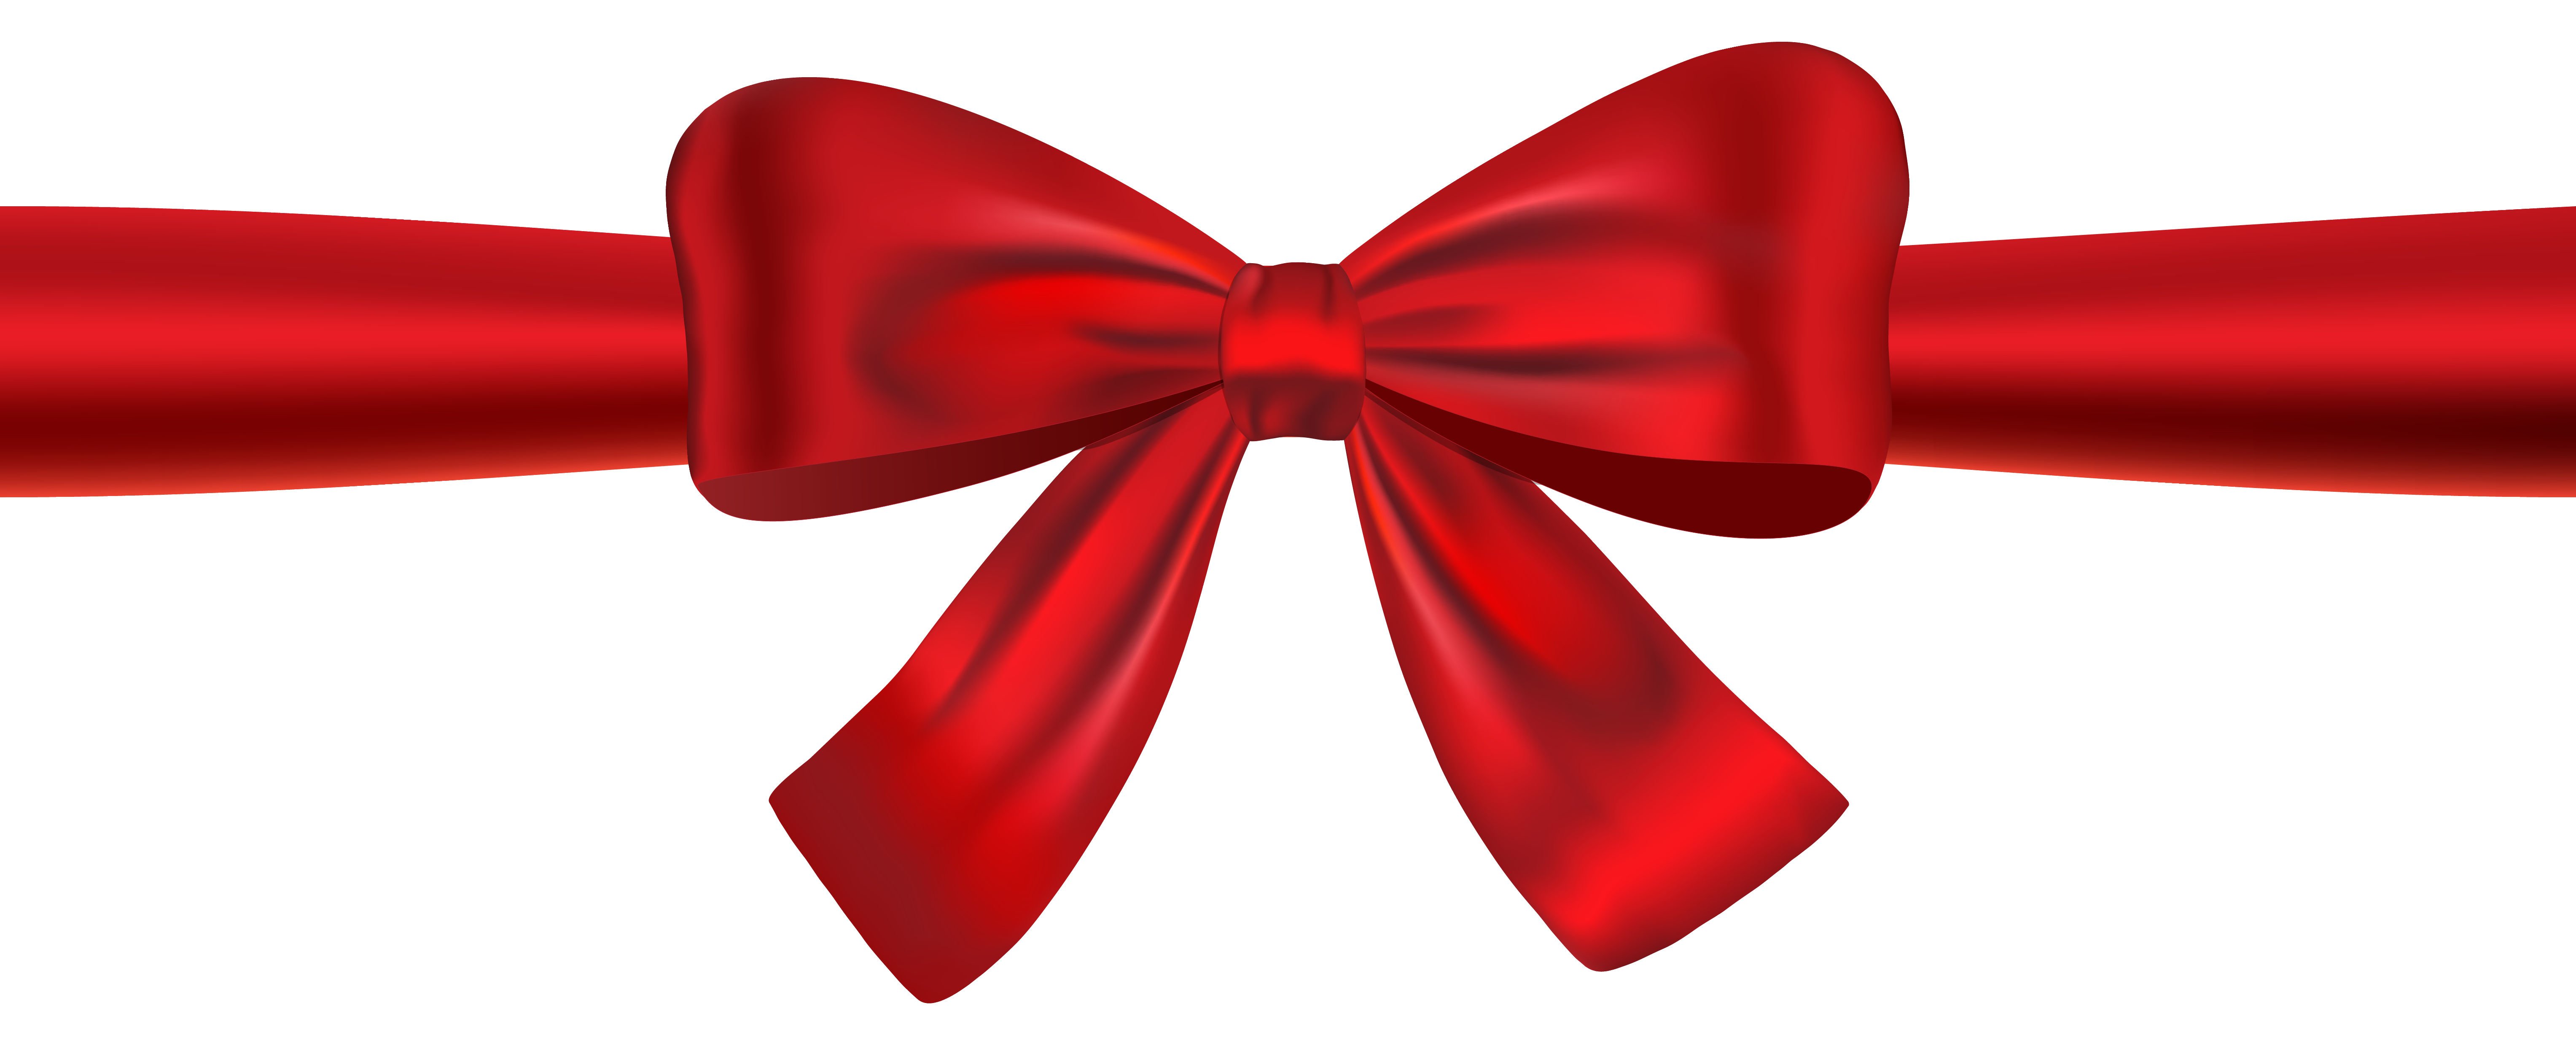 Bow Png Hd Png Image - Bow, Transparent background PNG HD thumbnail